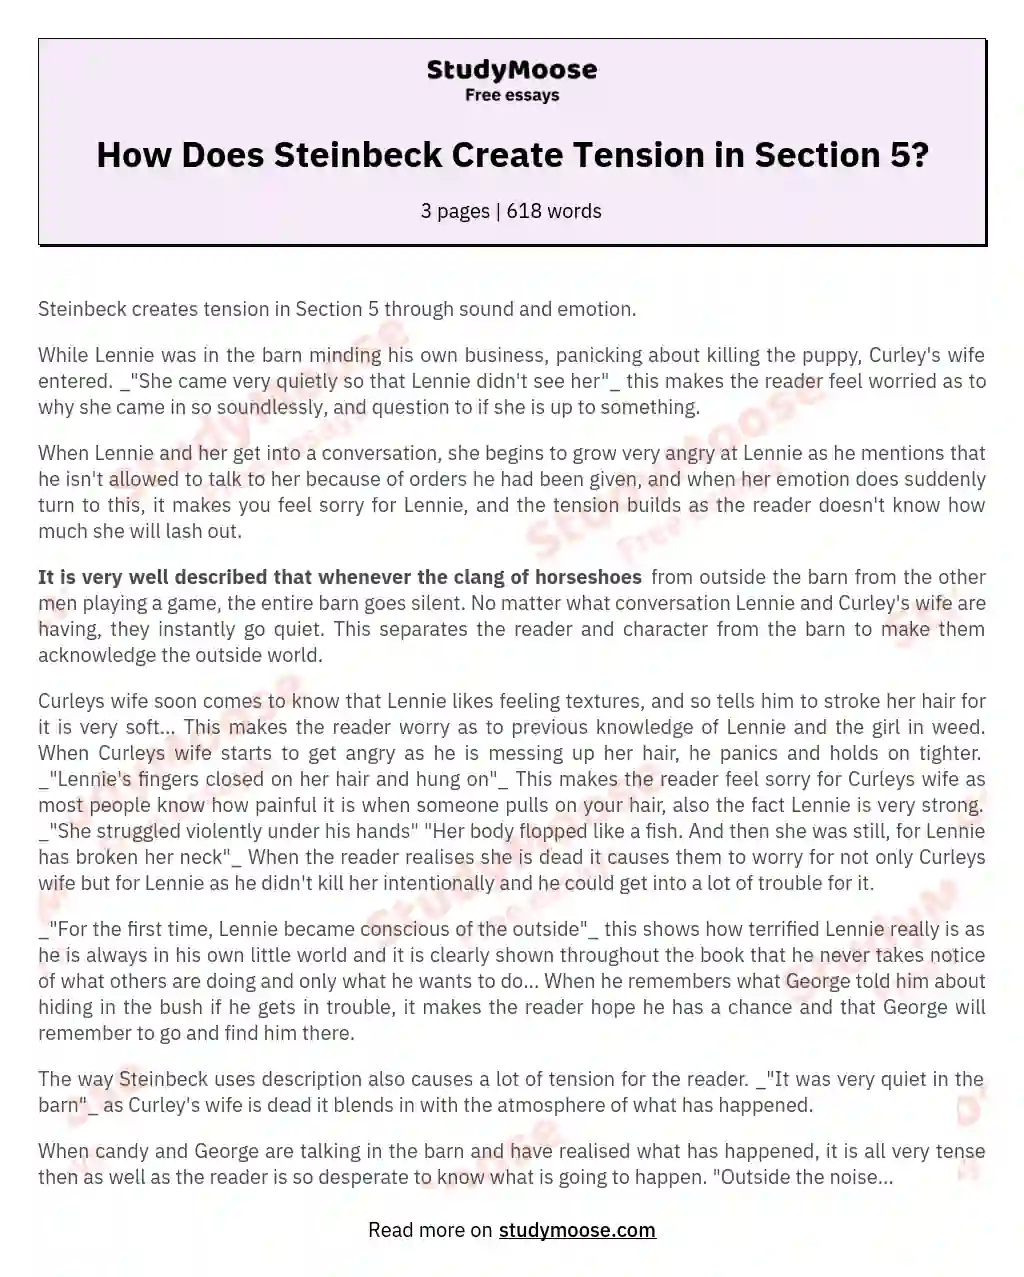 How Does Steinbeck Create Tension in Section 5? essay